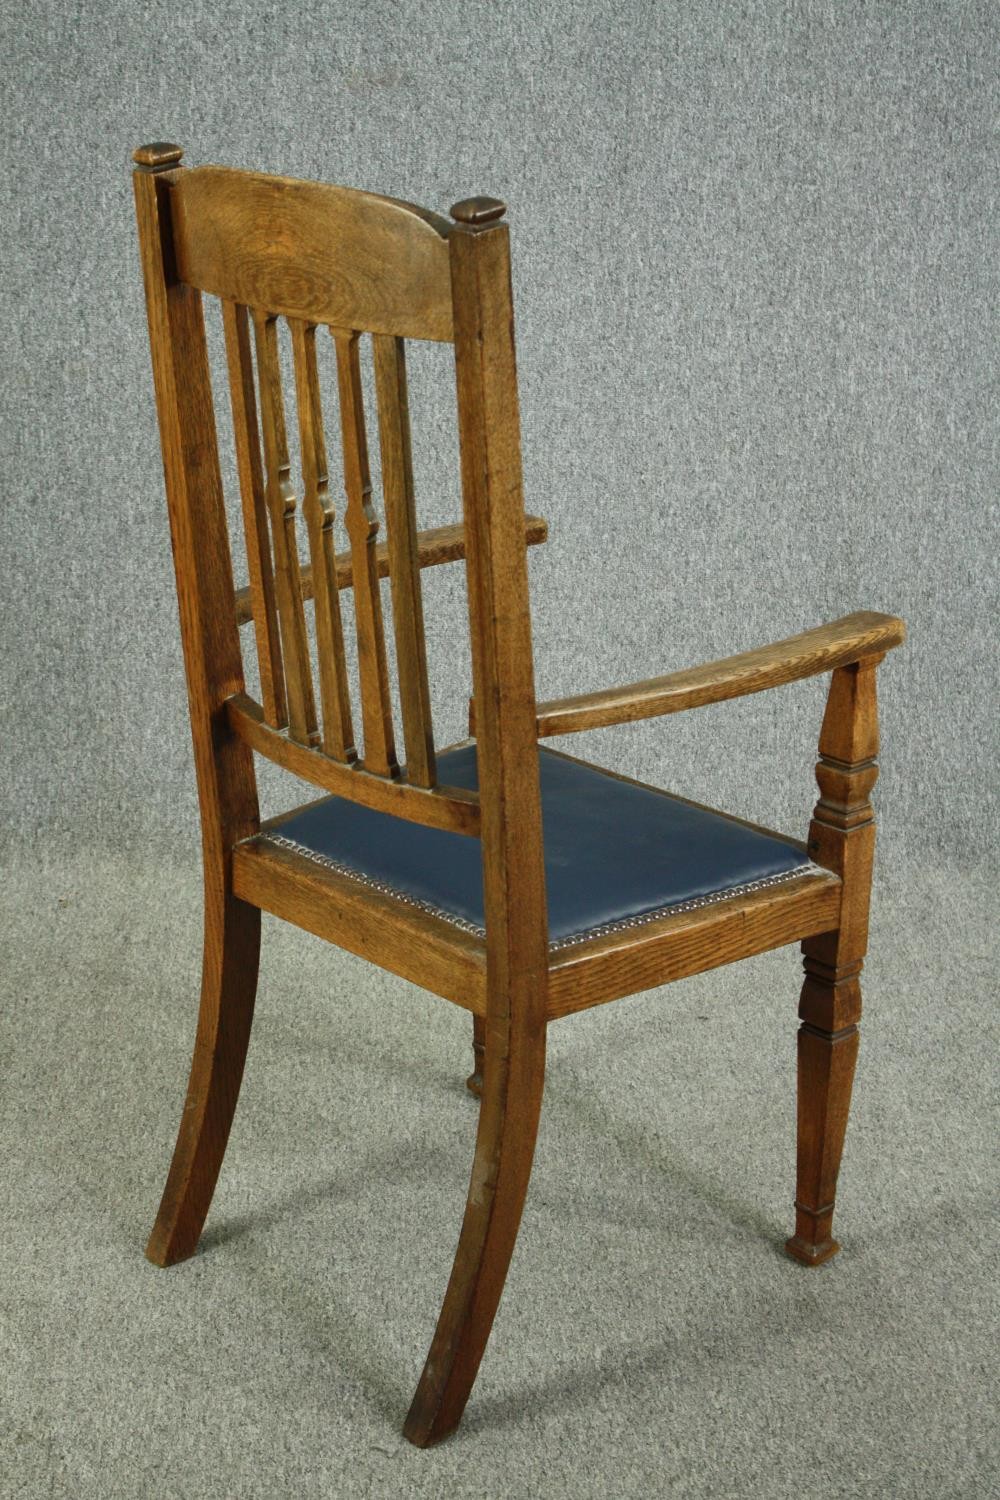 Armchairs, a pair, late 19th century oak. - Image 4 of 8